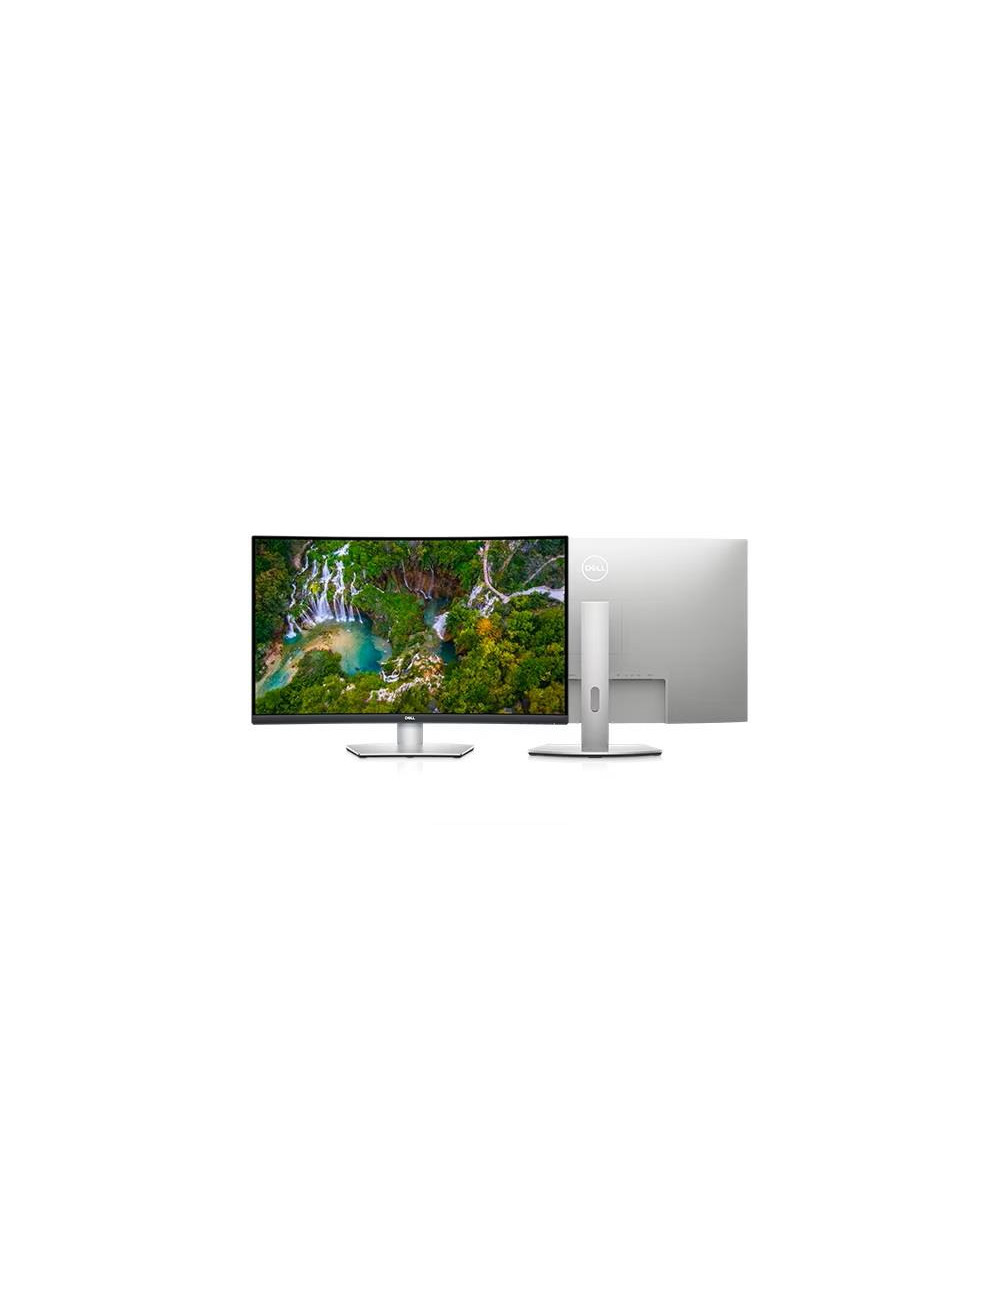 LCD Monitor|DELL|S3221QSA|31.5"|Business/4K/Curved|Panel VA|3840x2160|16:9|60Hz|Matte|4 ms|Speakers|Height adjustable|Tilt|Colou